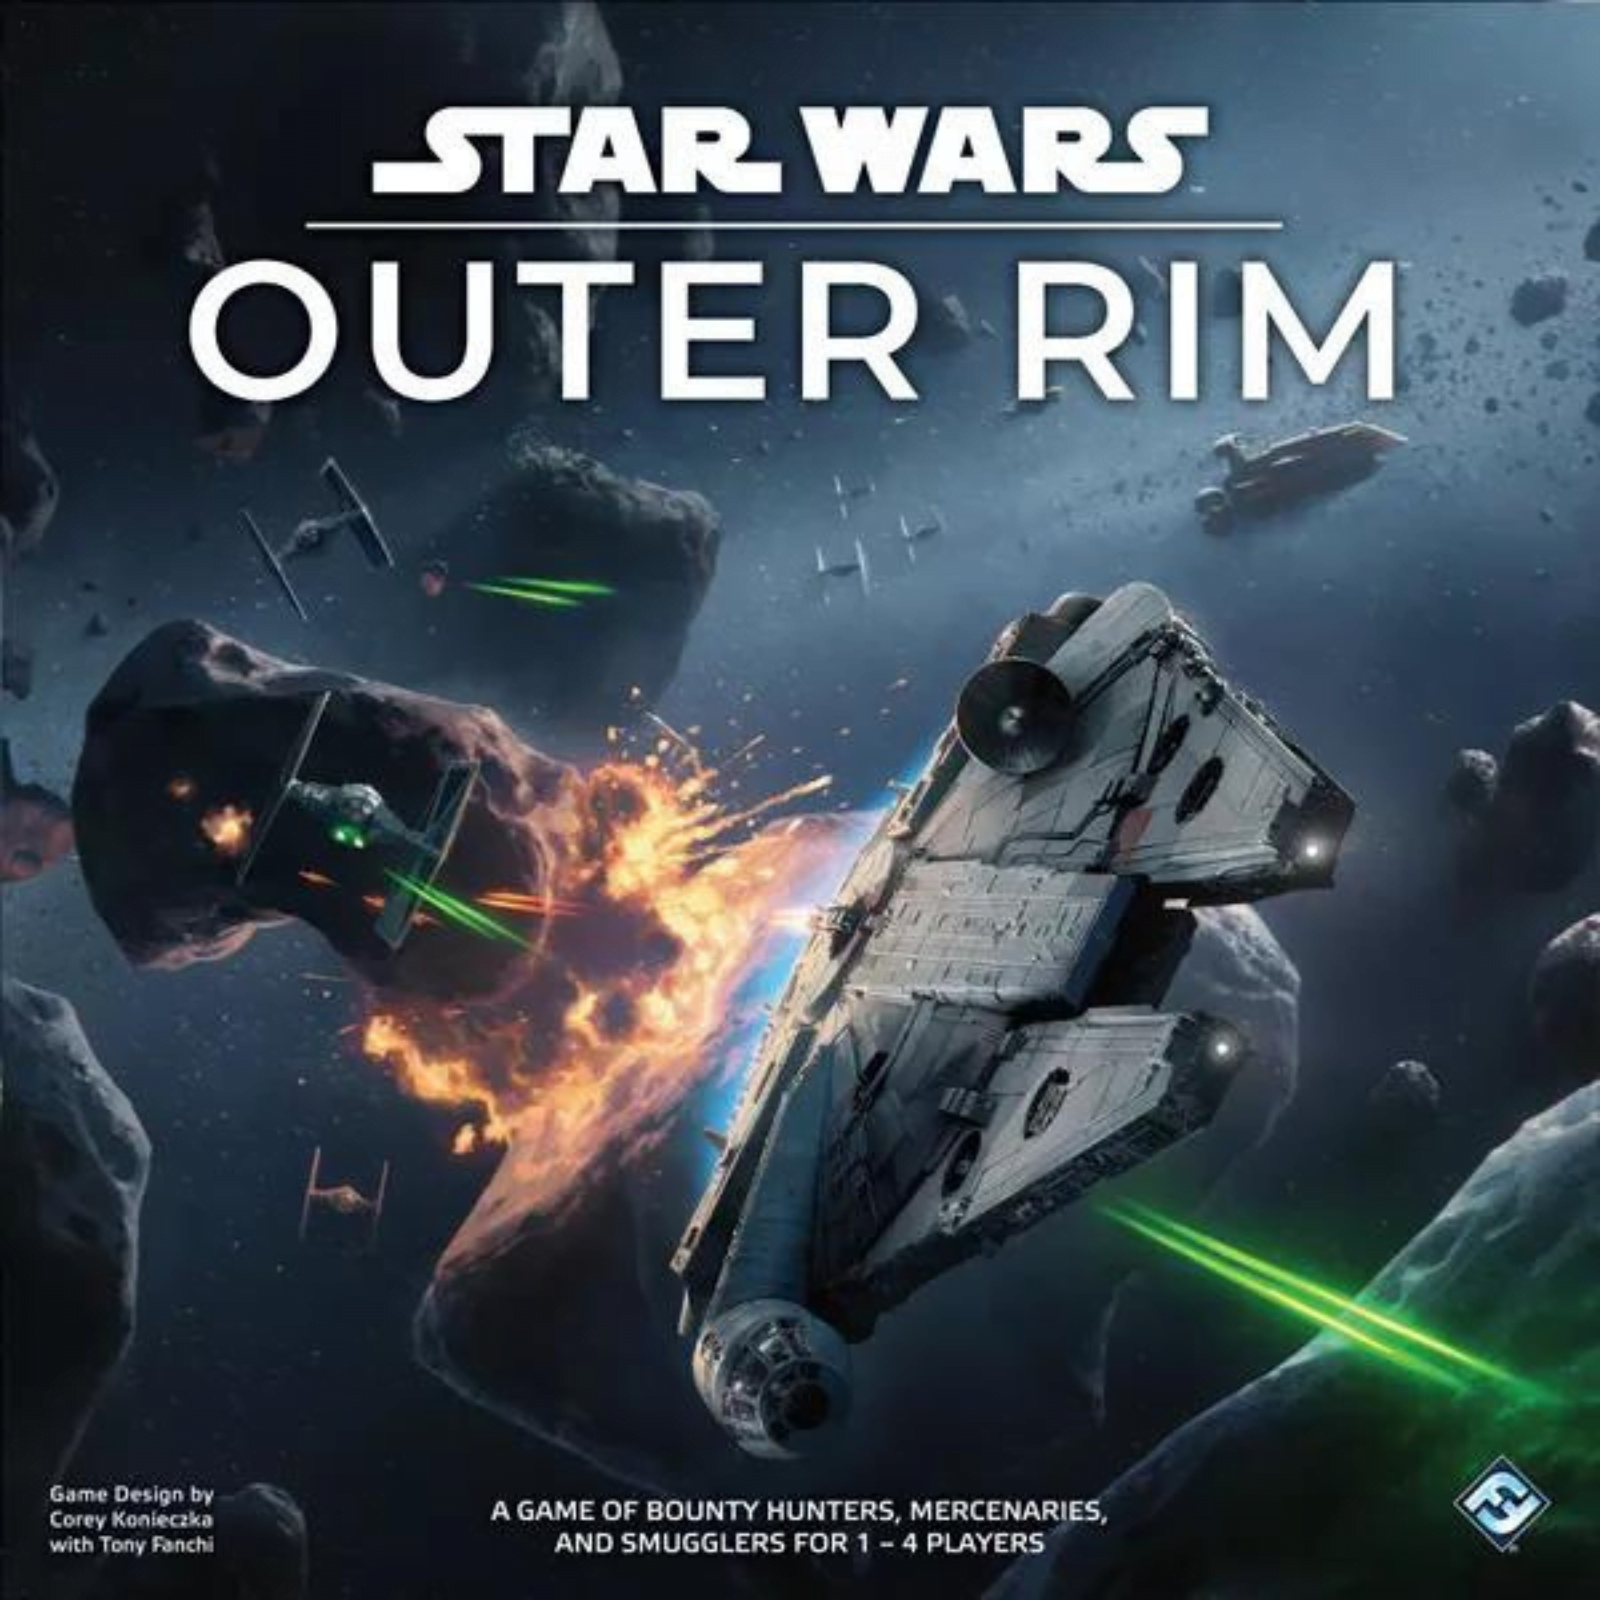 Star Wars Outer Rim – A Featured Table Review